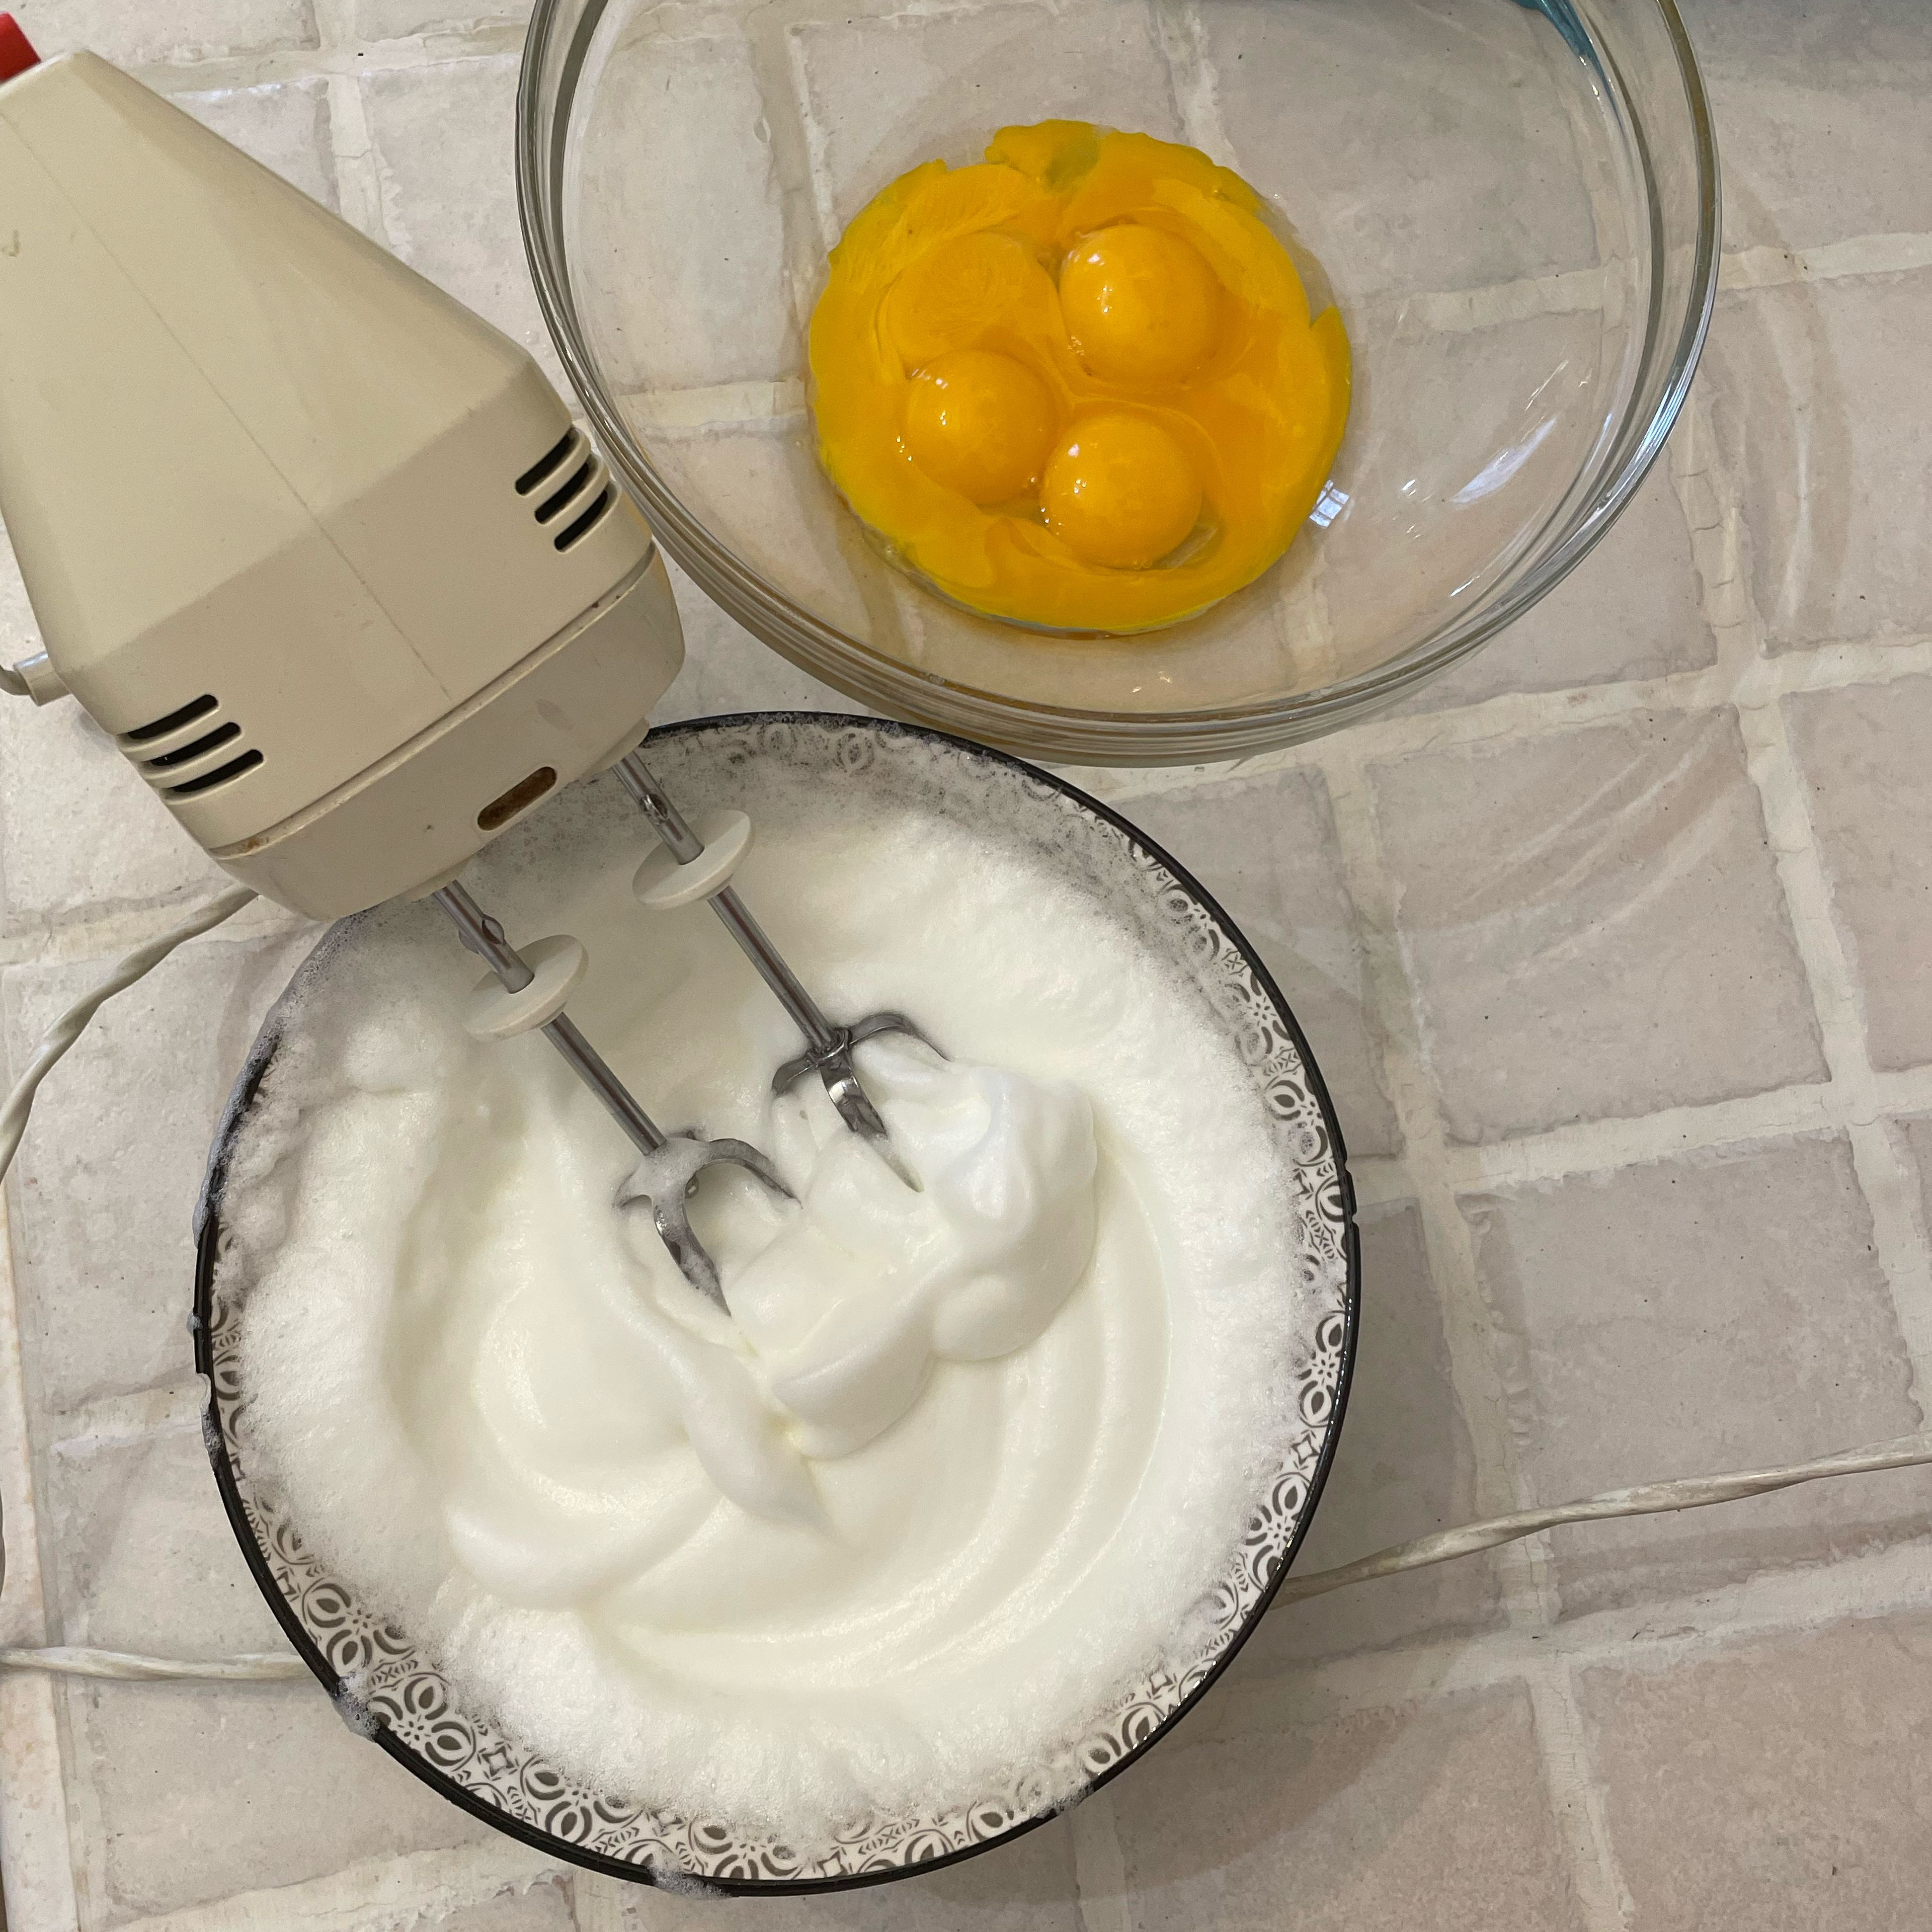 To prepare the sponge cake (steps 1-4): separate 6 egg yolks from the egg whites. Set the egg yolks aside. Add a pinch of salt to the egg whites and start mixing with a mixer until they are whipped.